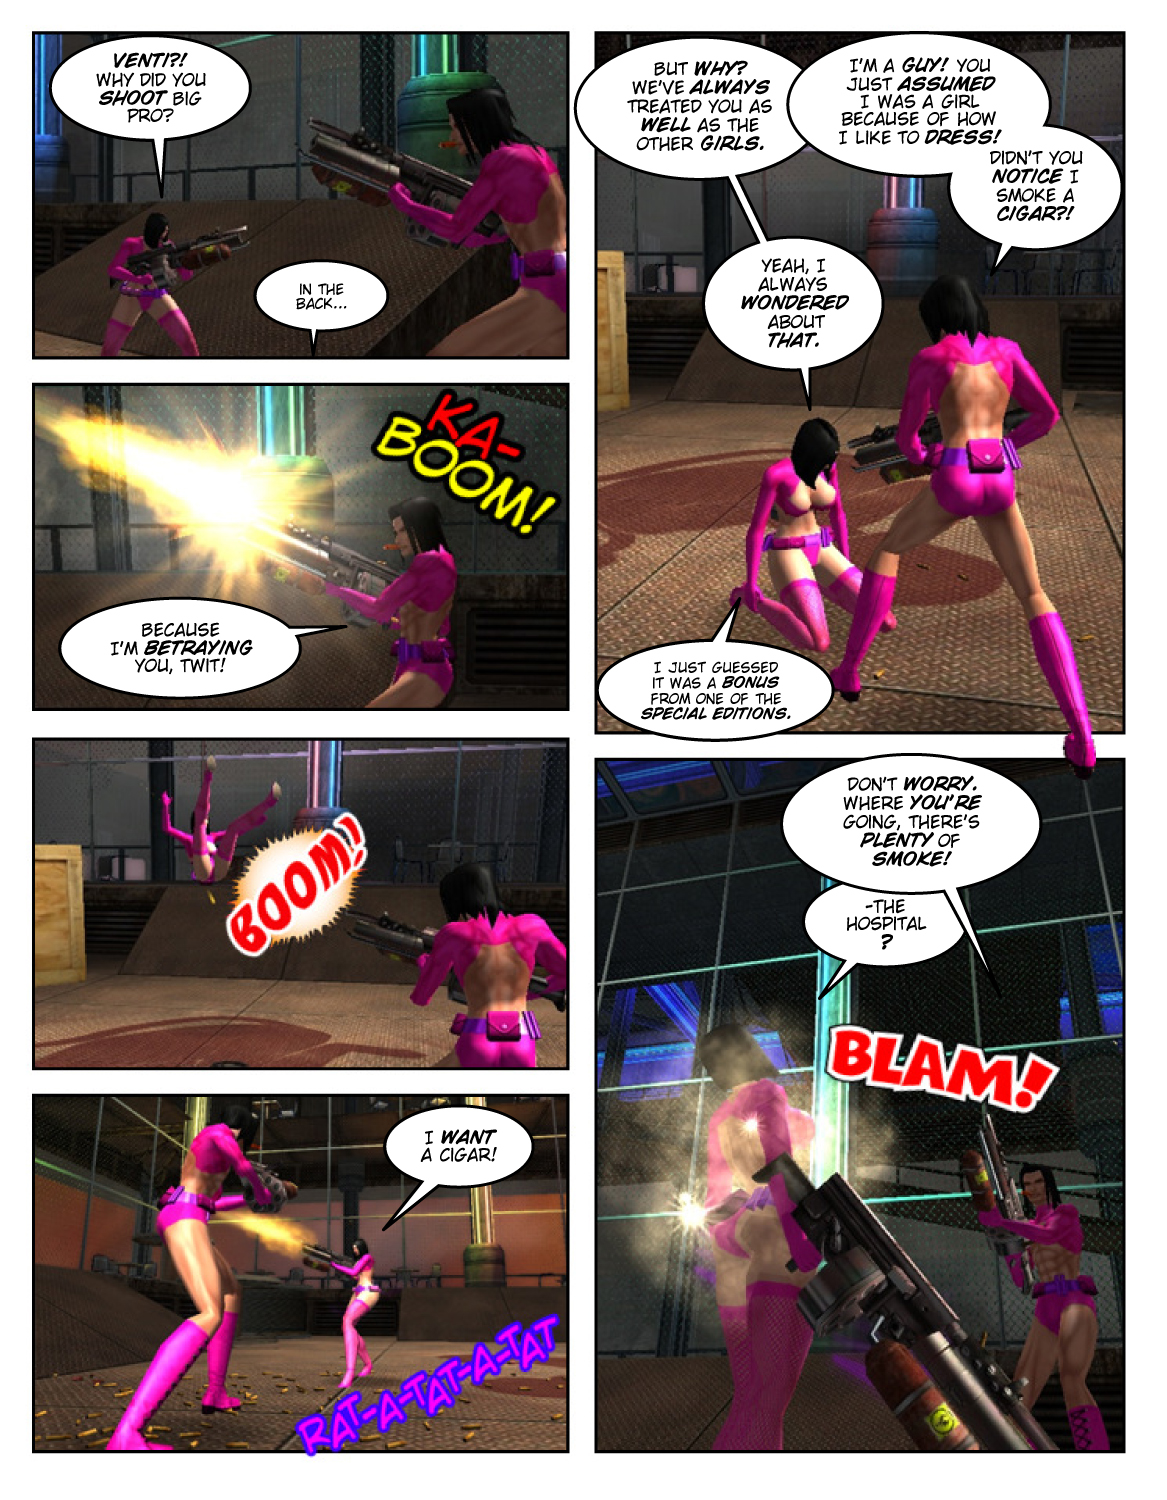 Les Professionnels 1 Page 6 – MMO Hospital